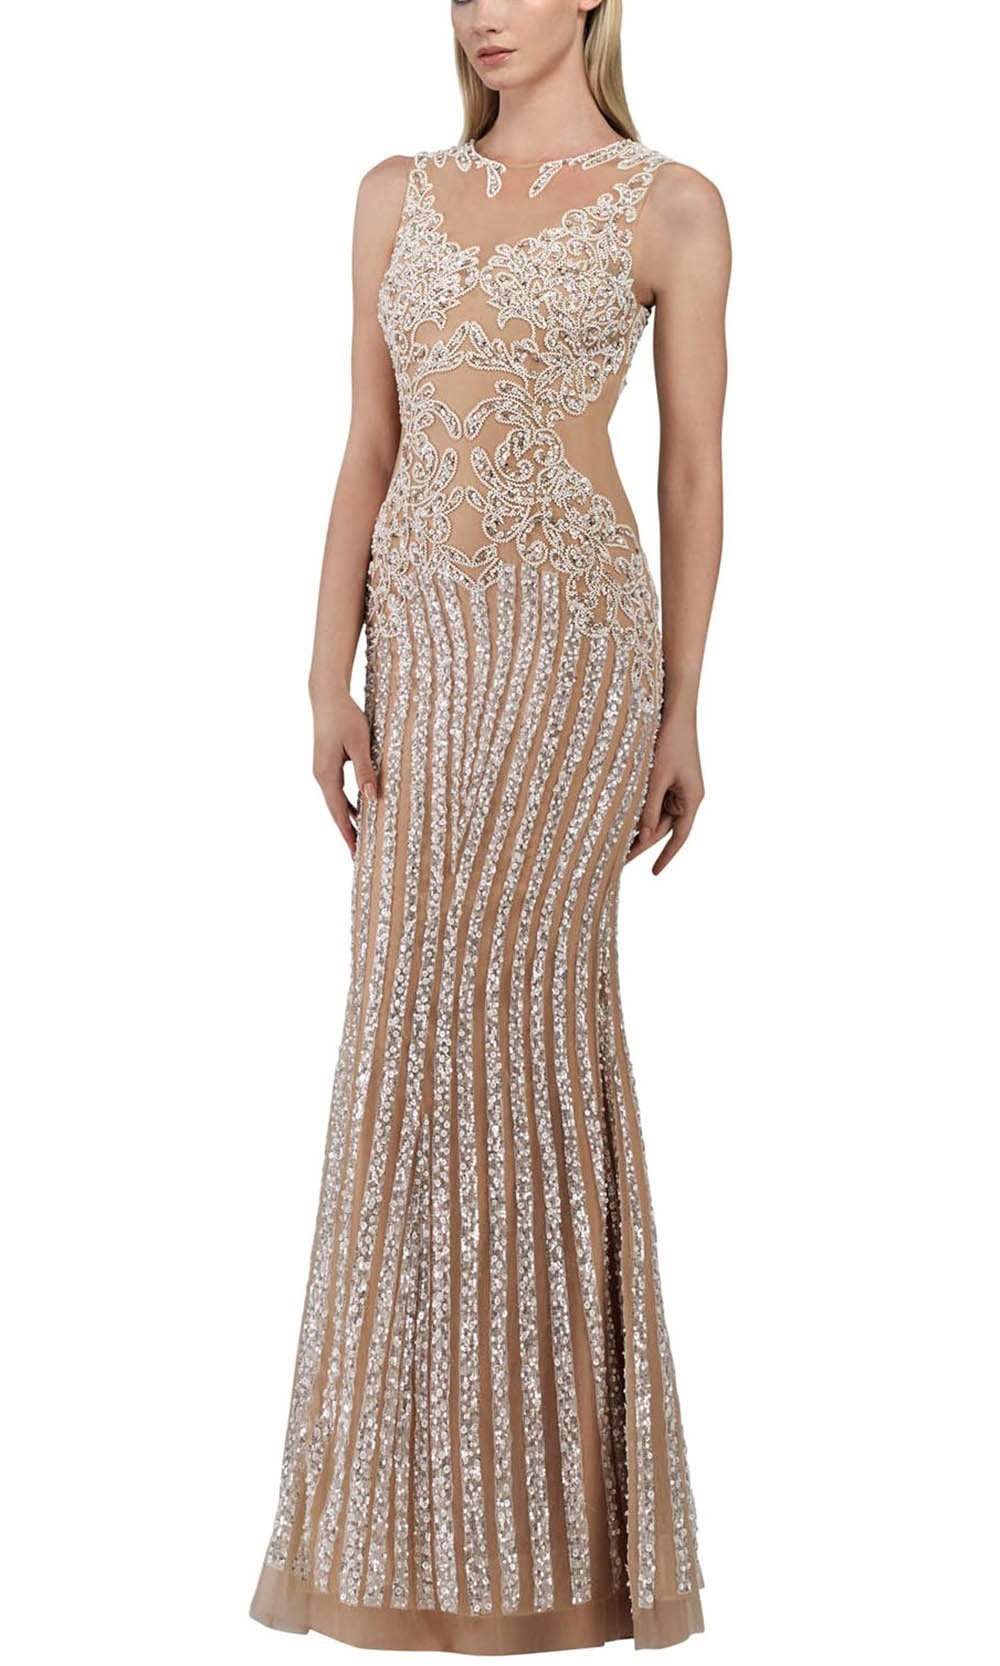 Janique - 17007 Sparkly Nude Illusion Evening Gown In Ivory Special Occasion Dress 0 / Ivory